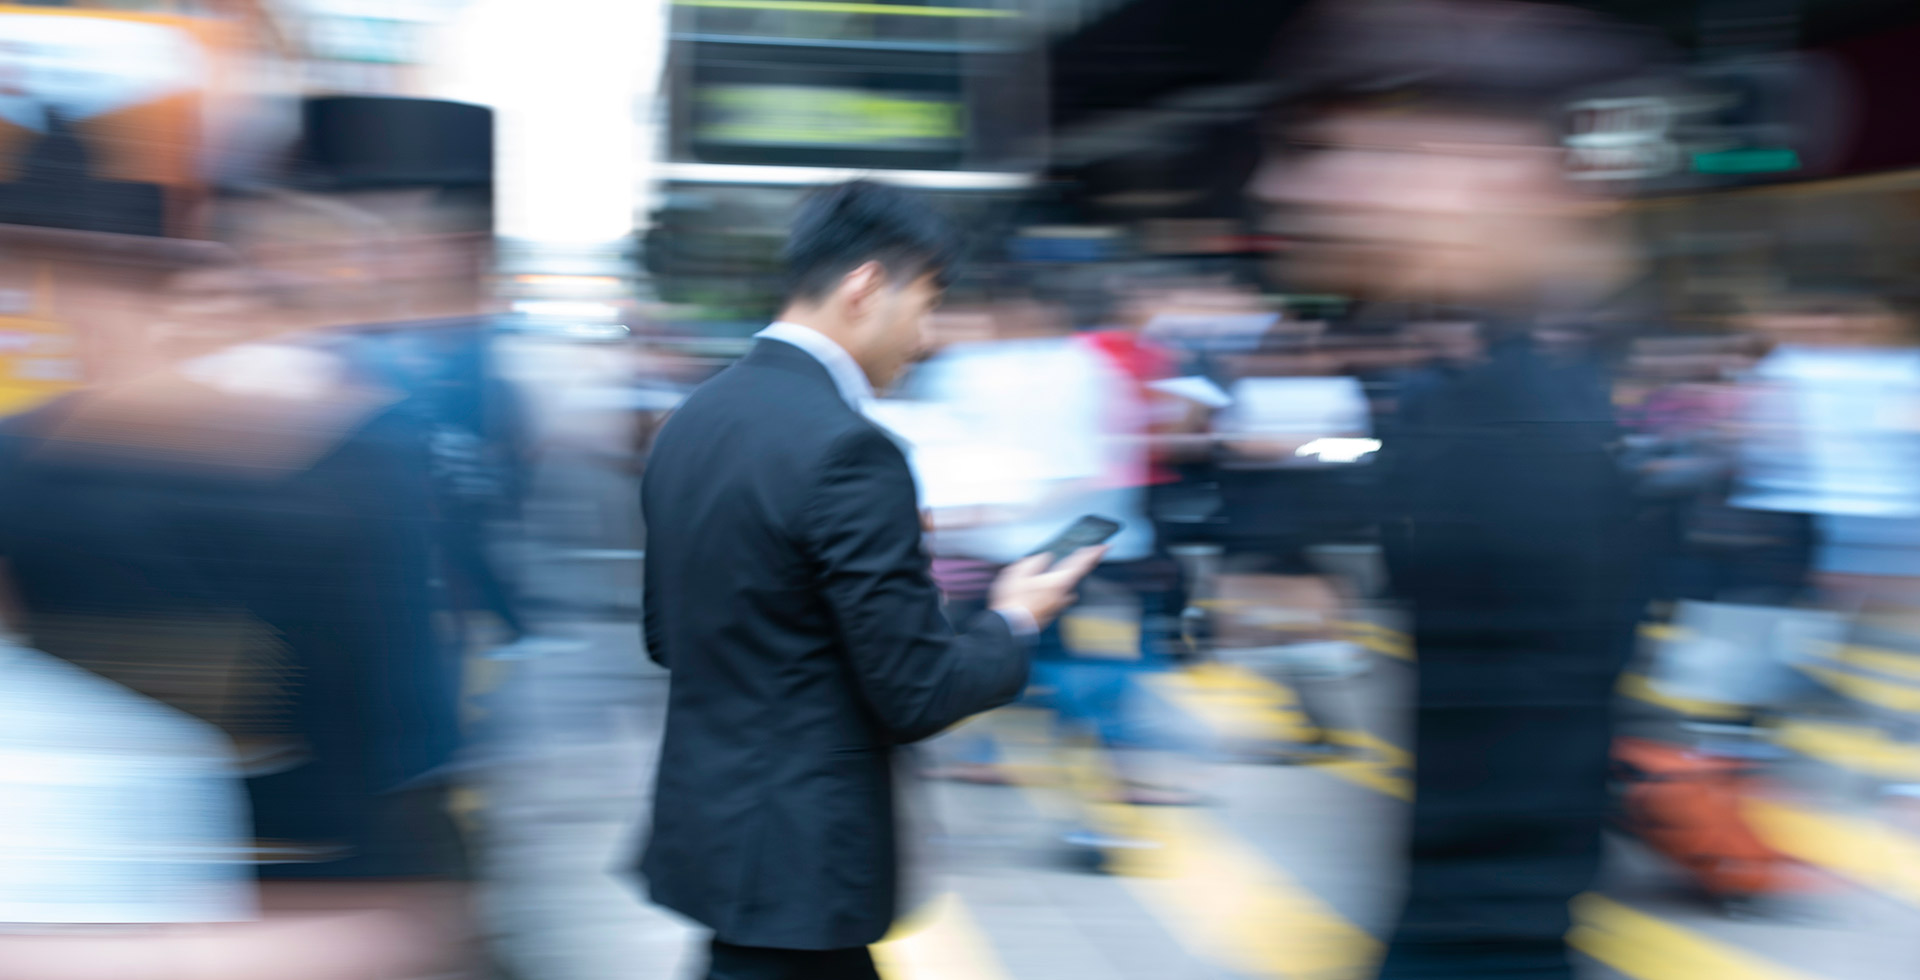 BussinesMan with mobile device in city center with blurred background